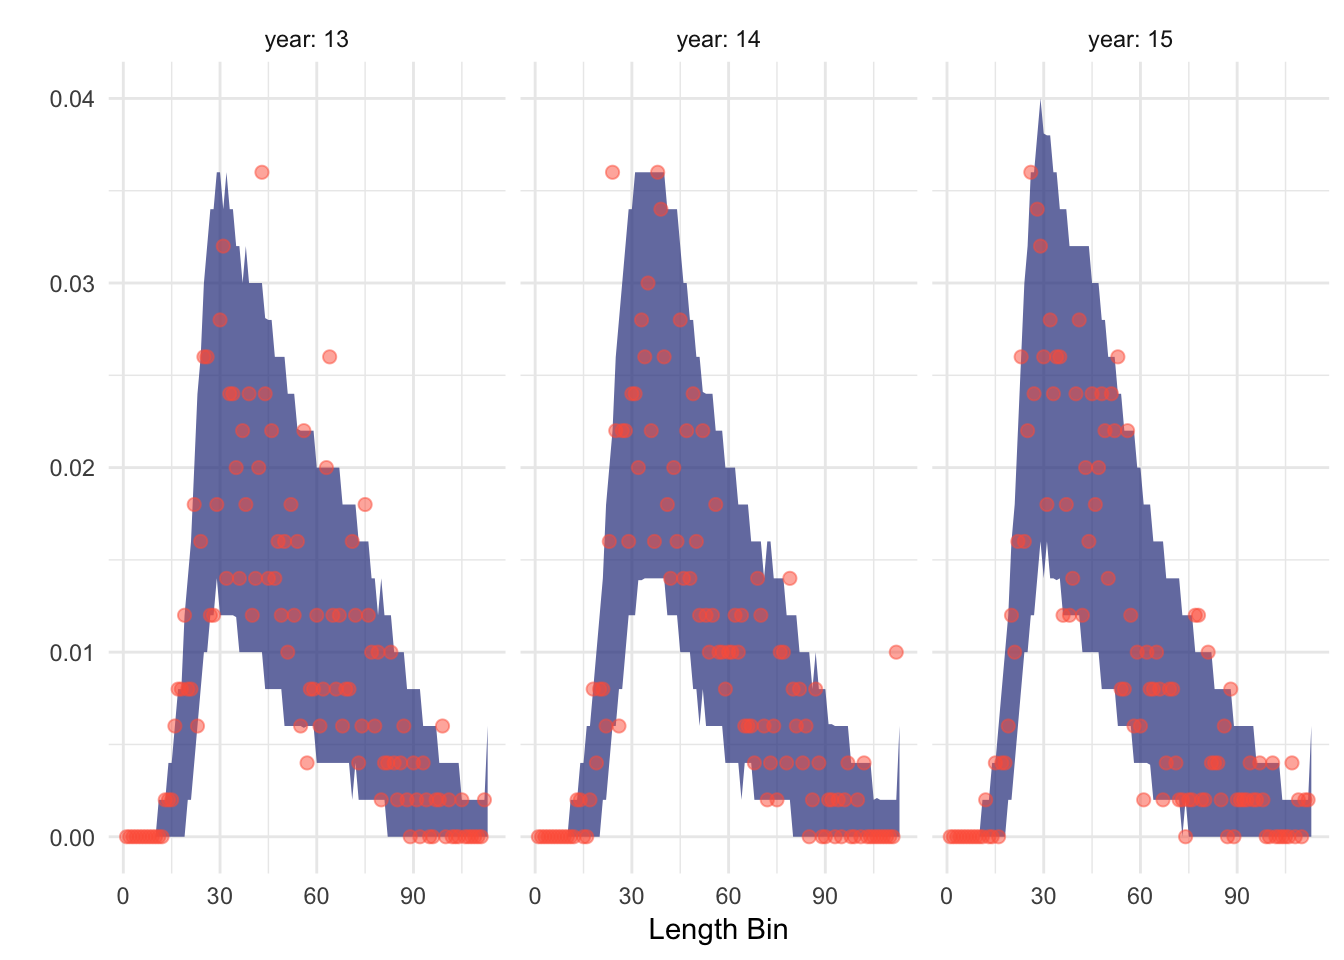 90% pospterior predictive distribution (shaded ribbon) of fitted length composition data (points). Nearly all observed points fall within the 90% bounds of the posterior predictive distribution